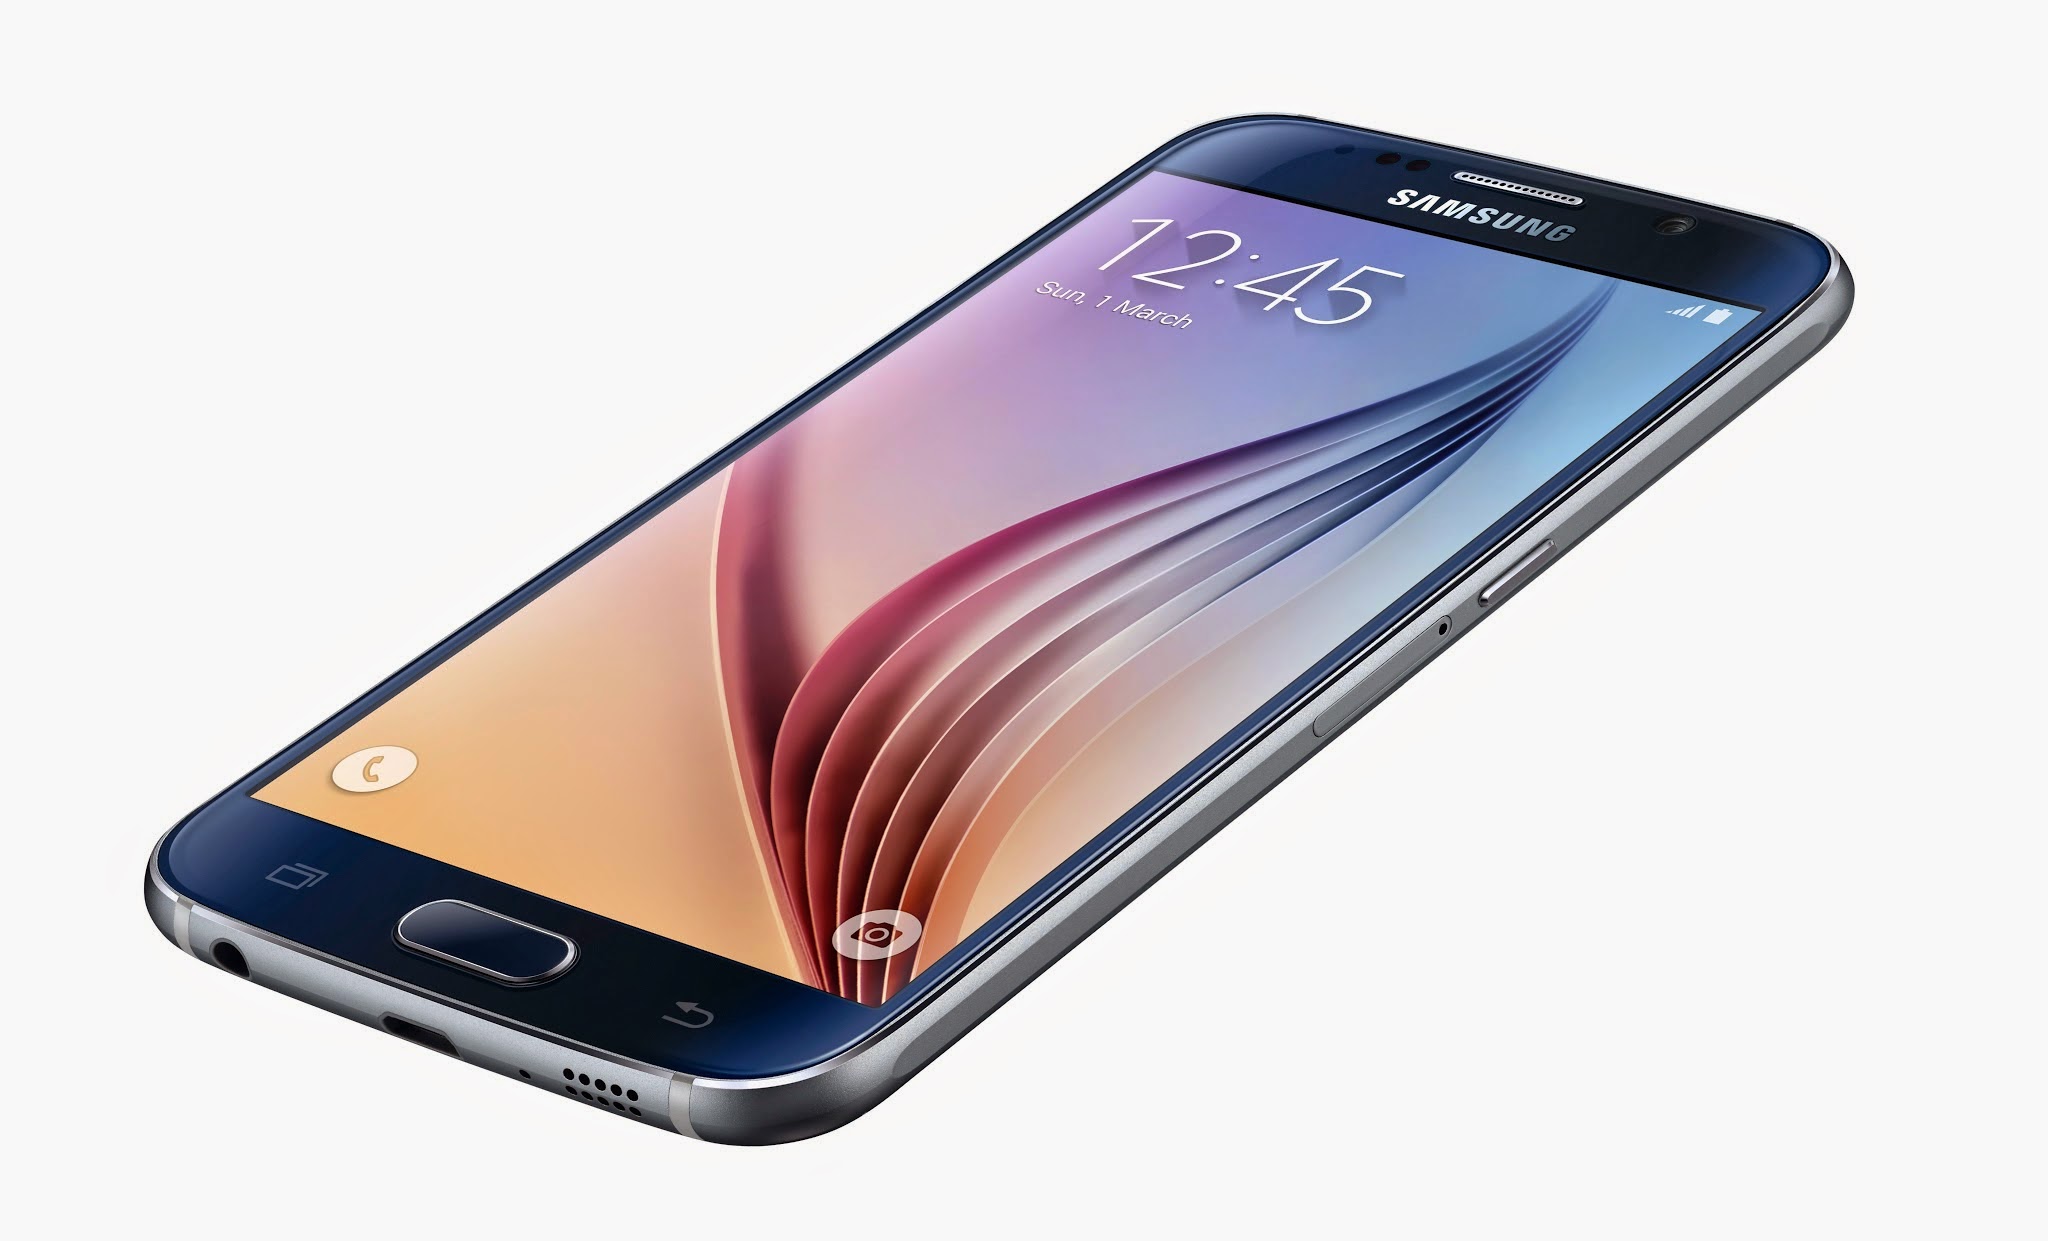 #MWC2015 - Samsung officialise le Galaxy S6